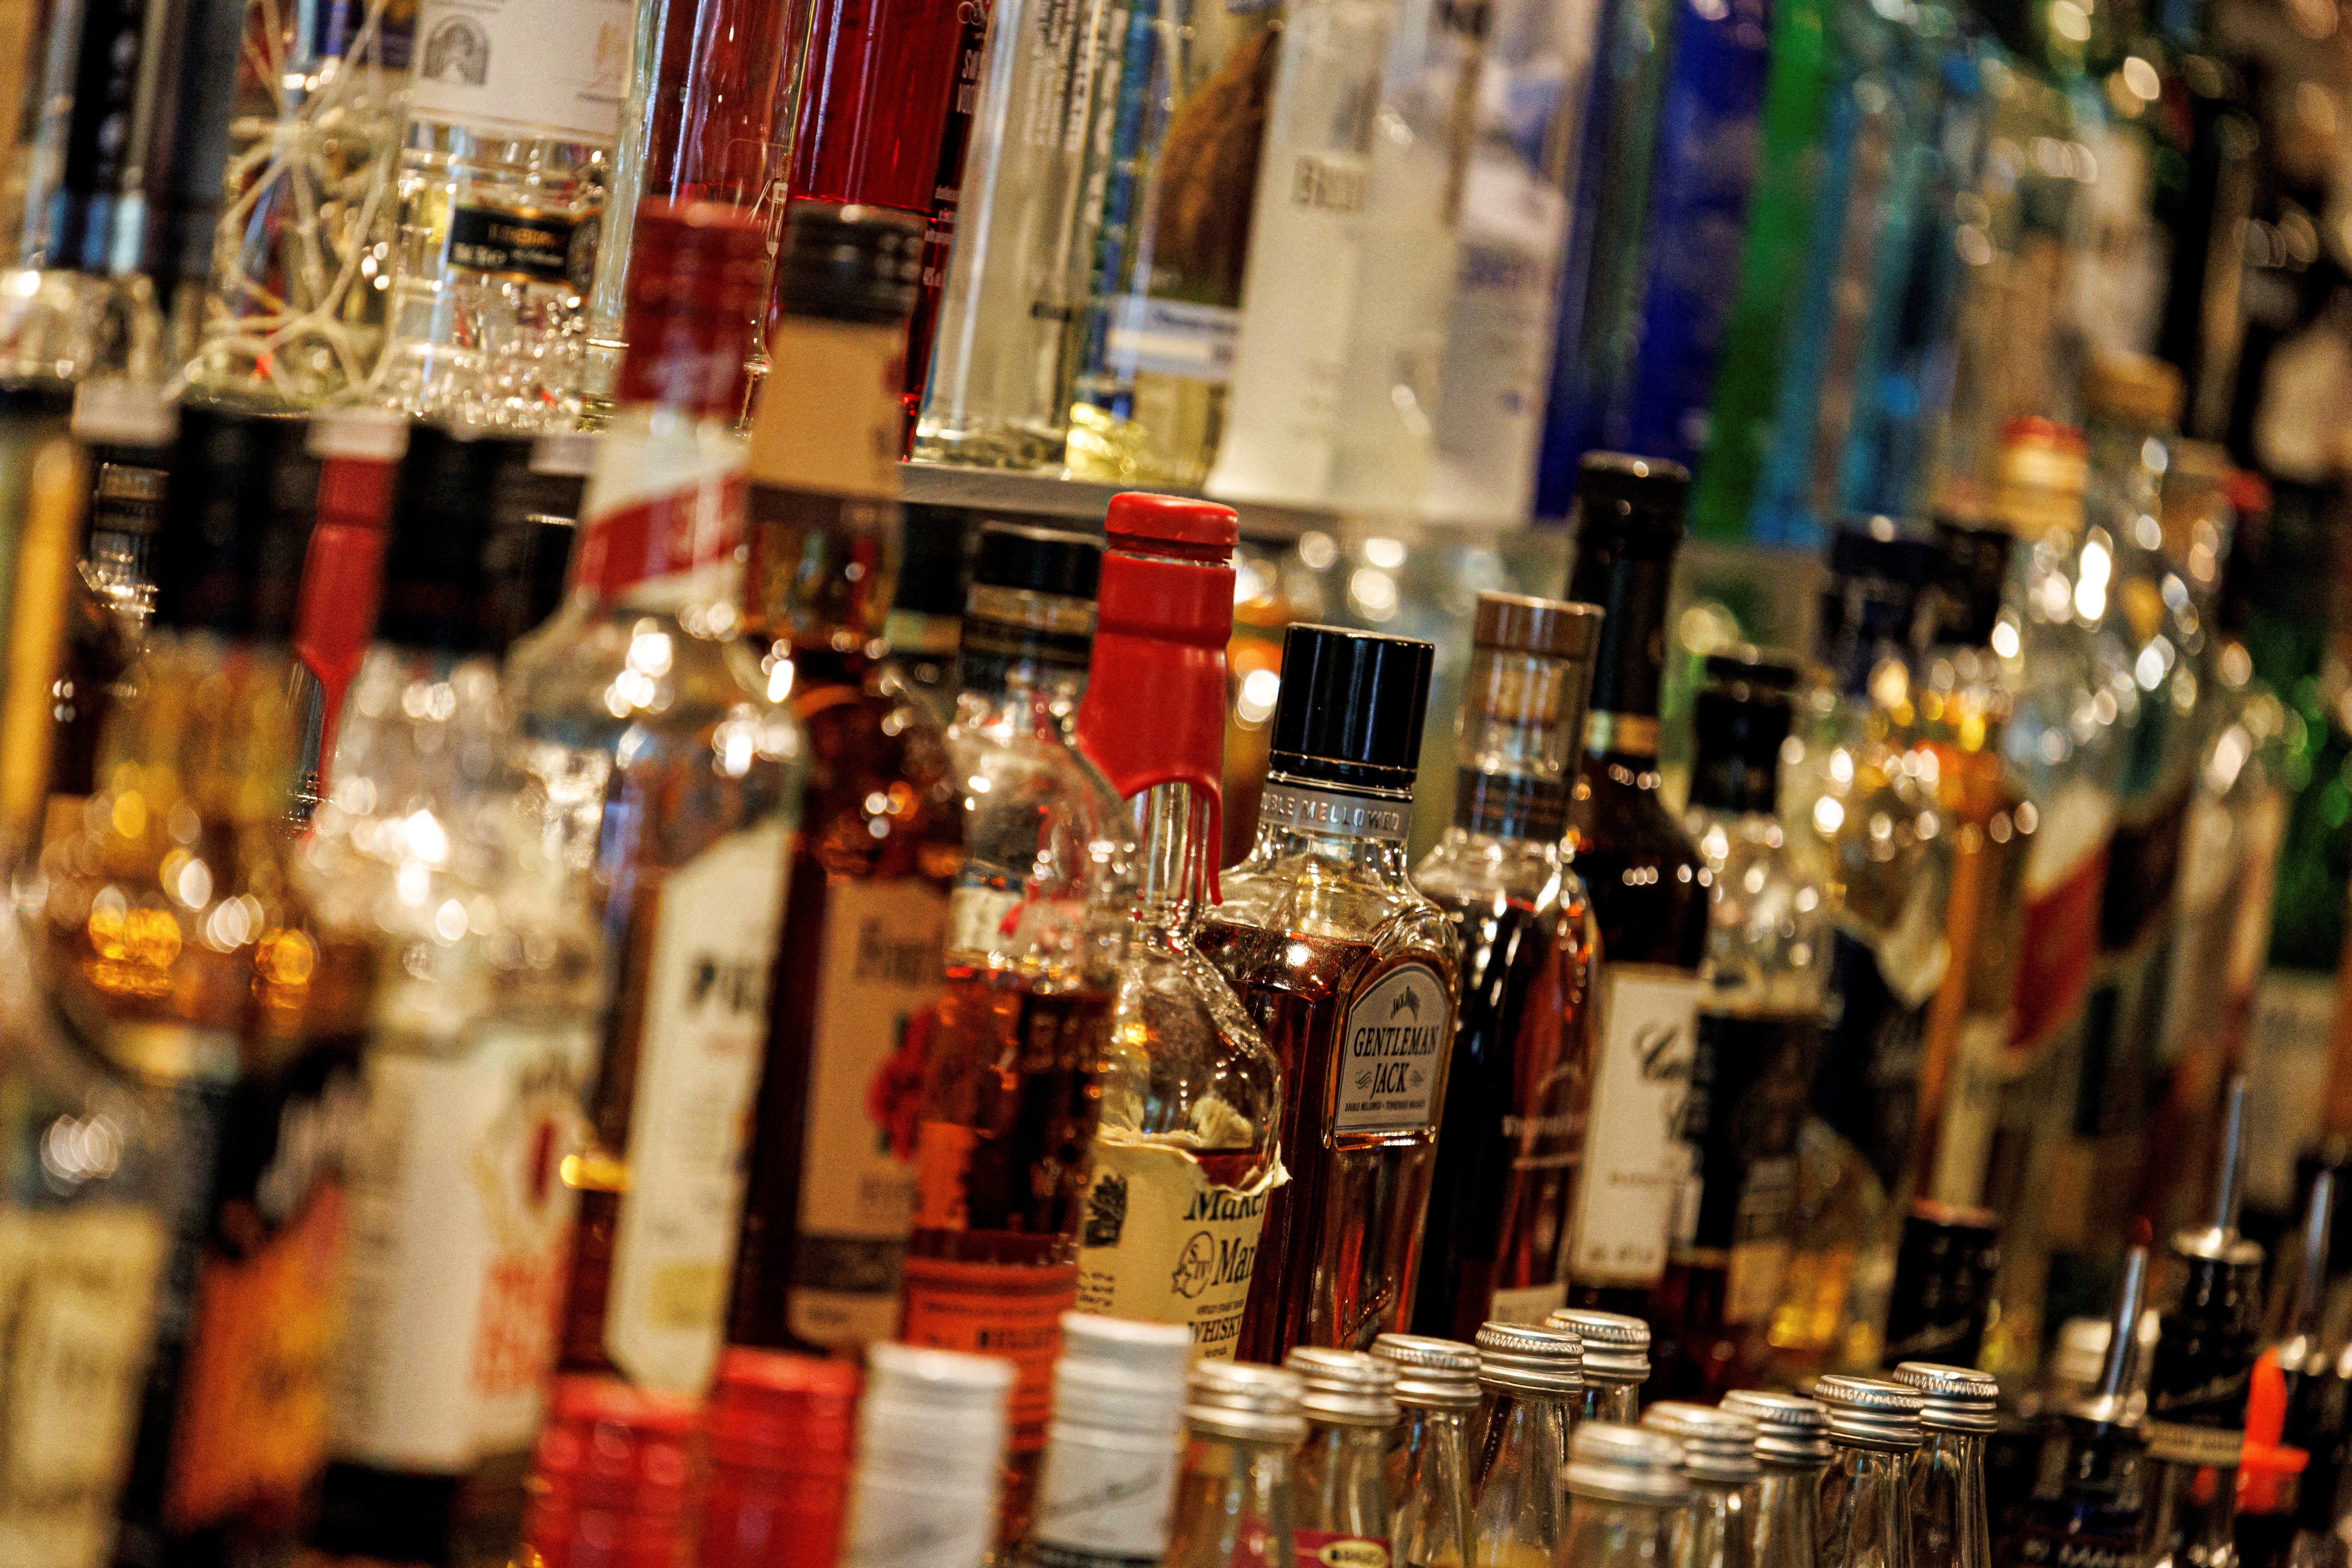 Alcohol taxes aren't high enough, says World Health Organisation